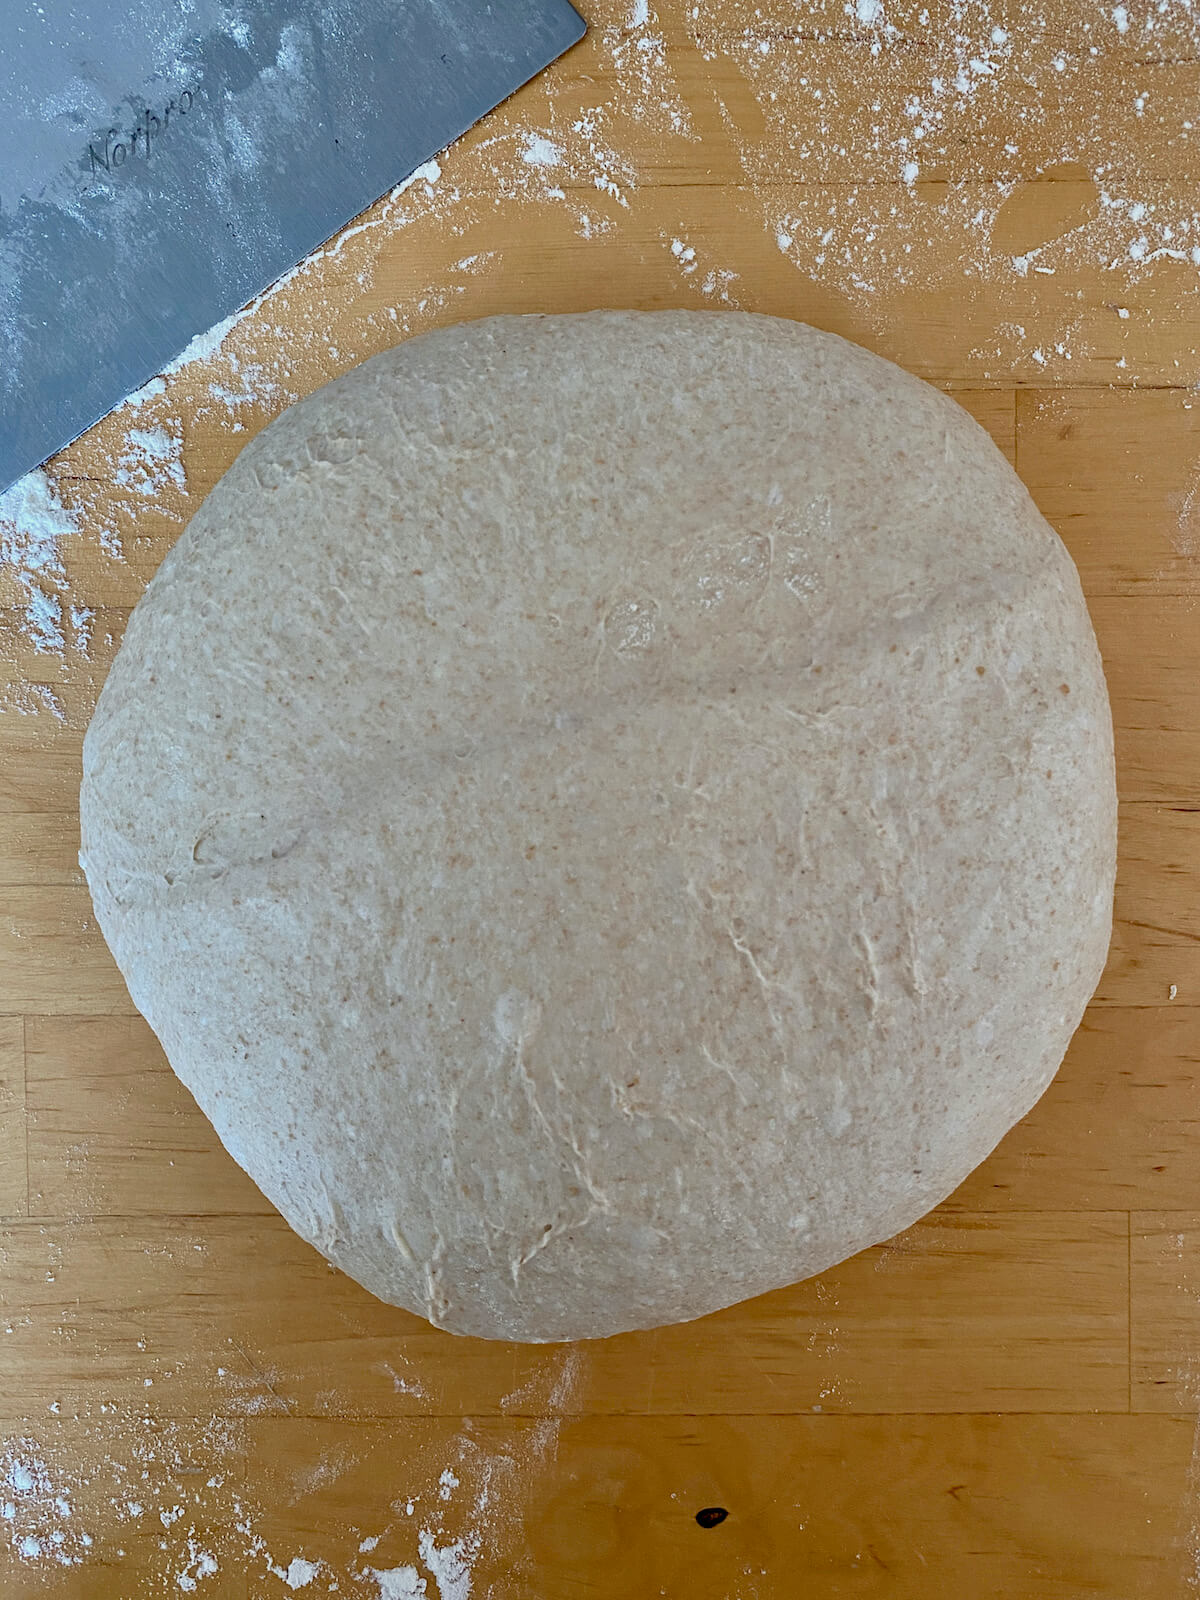 The dough after pre-shaping.